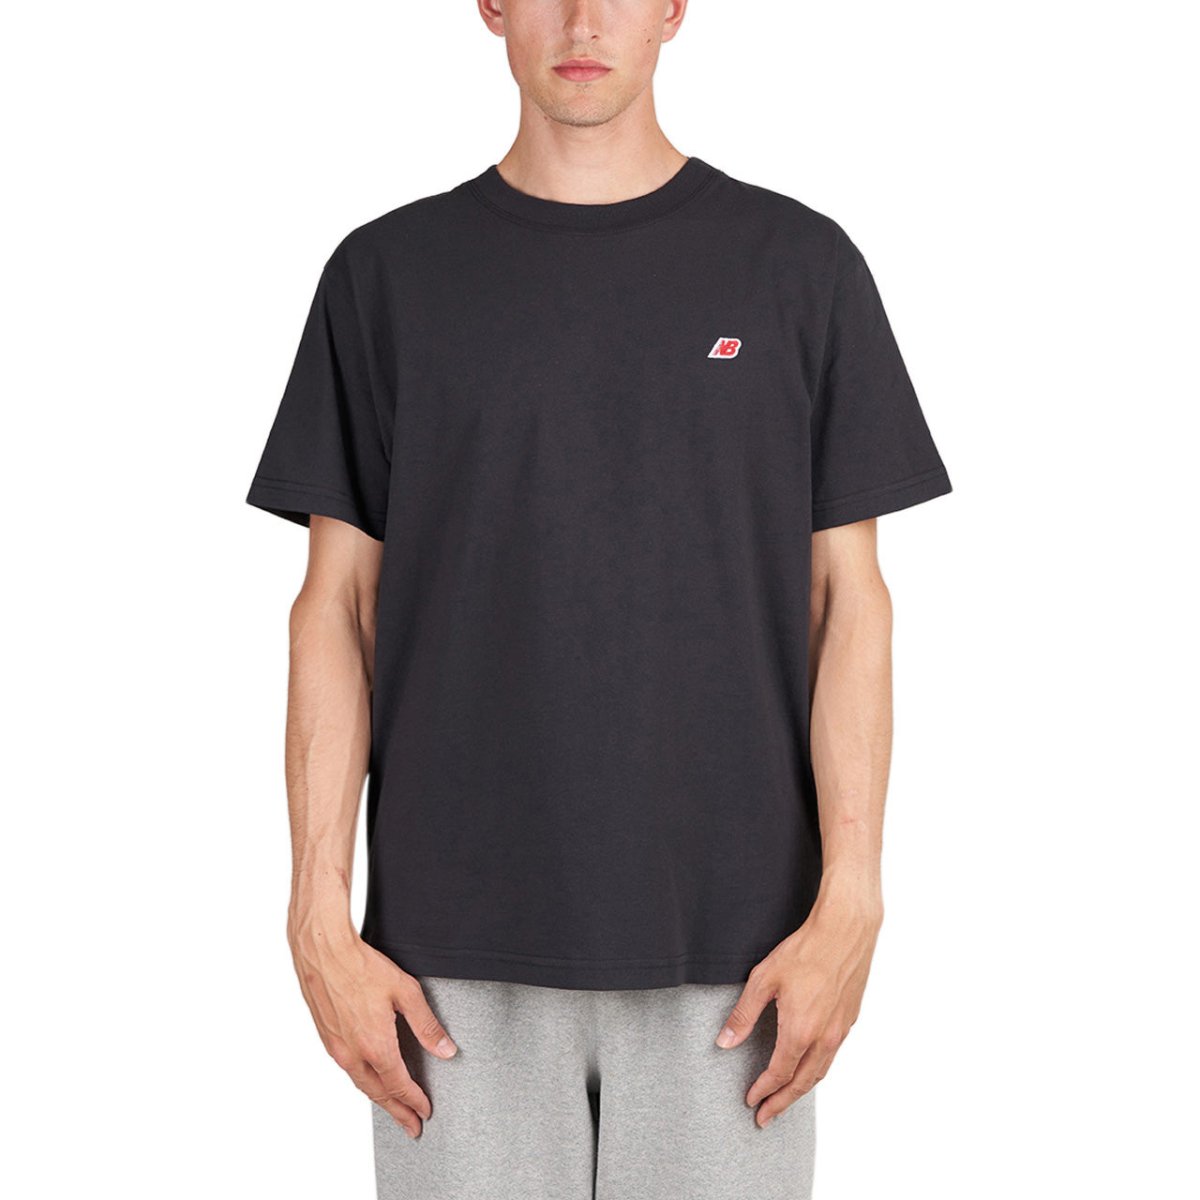 Image of New Balance Made in USA Core T-Shirt (Black)